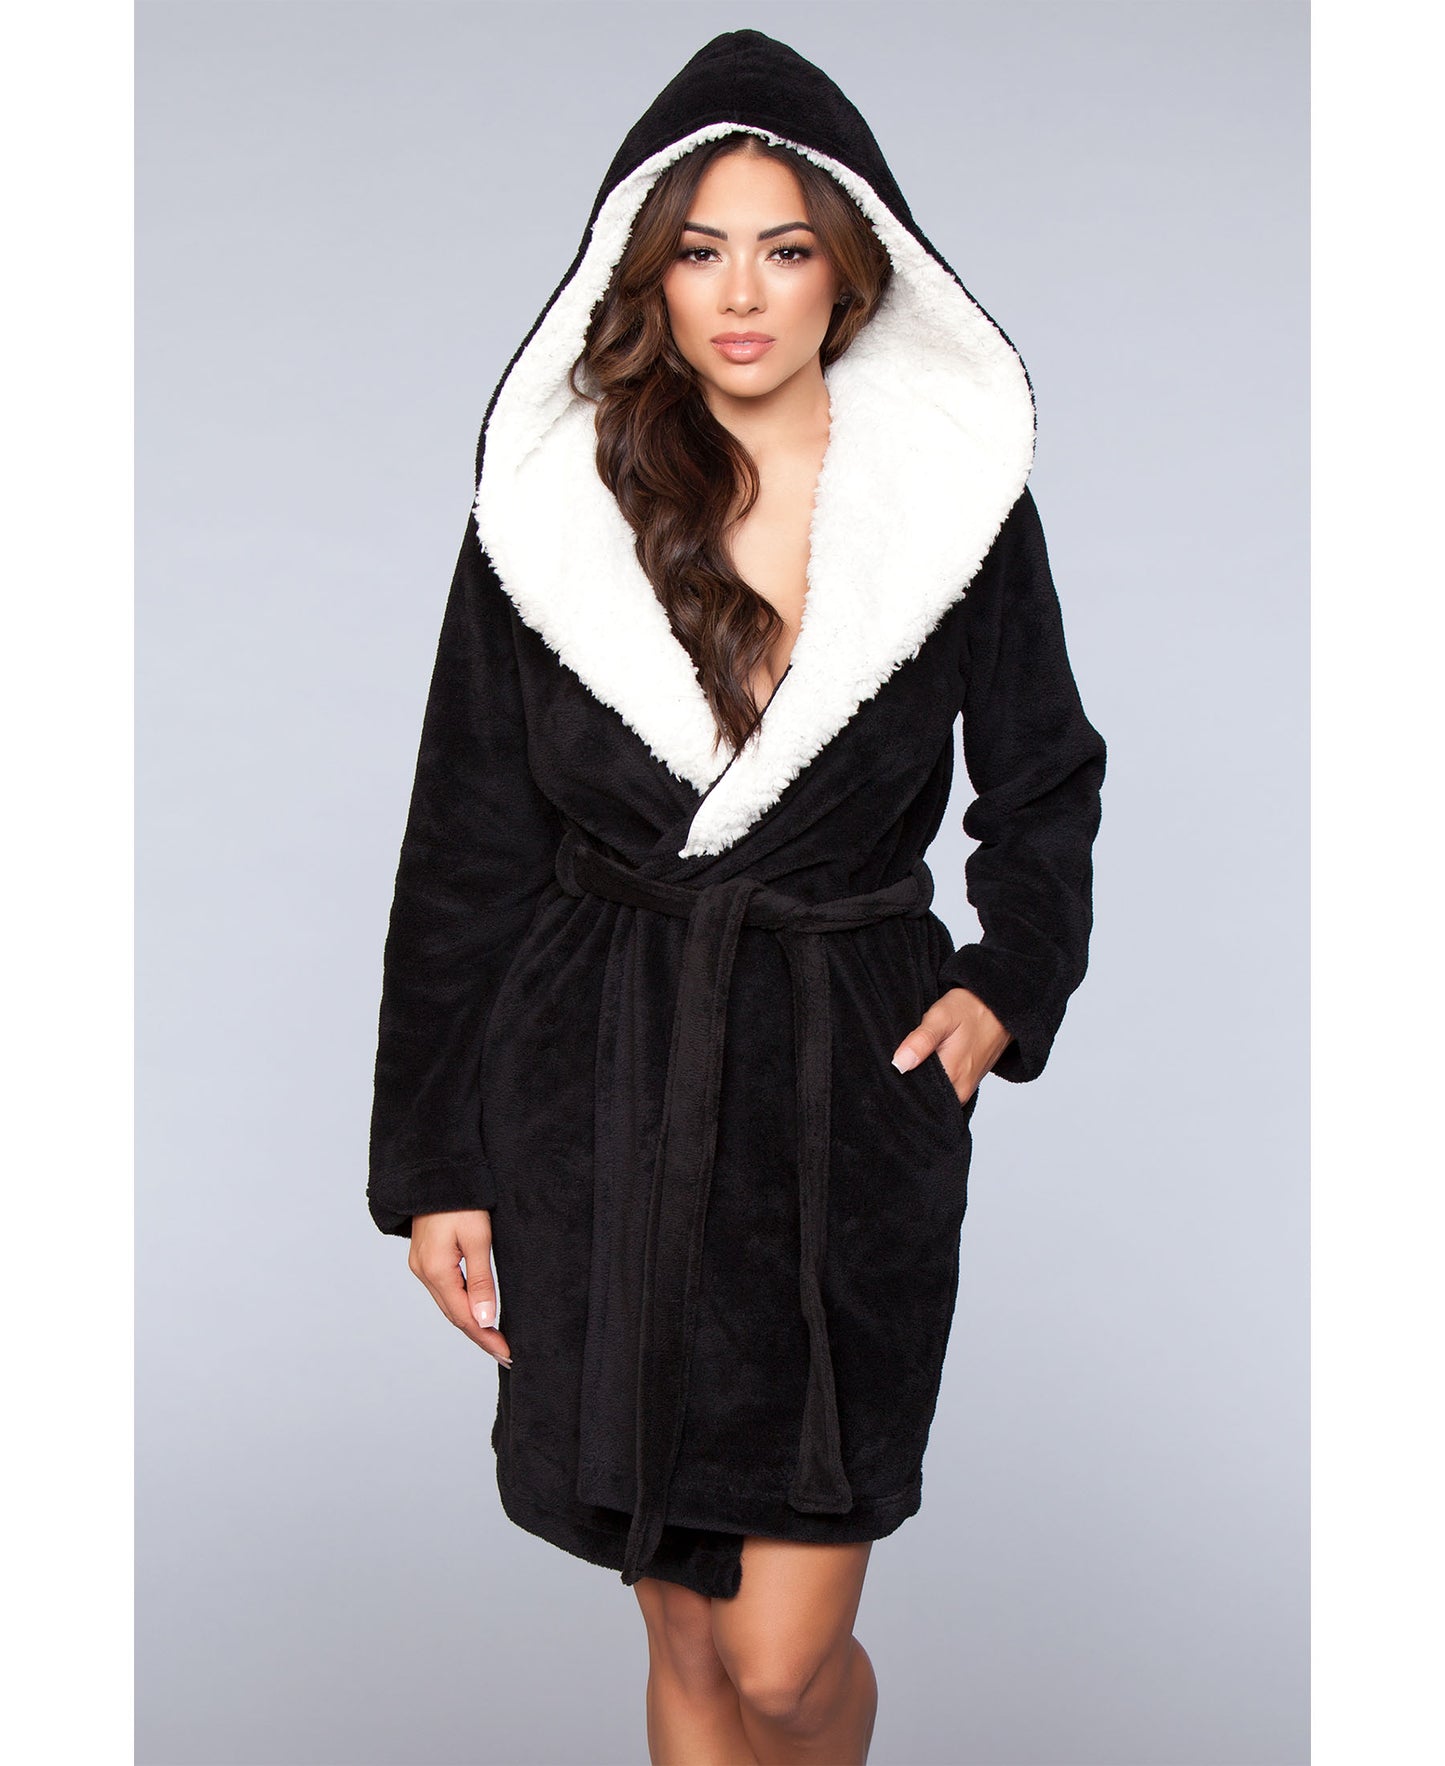 1817 Janet Robe Black/white front view hood up 